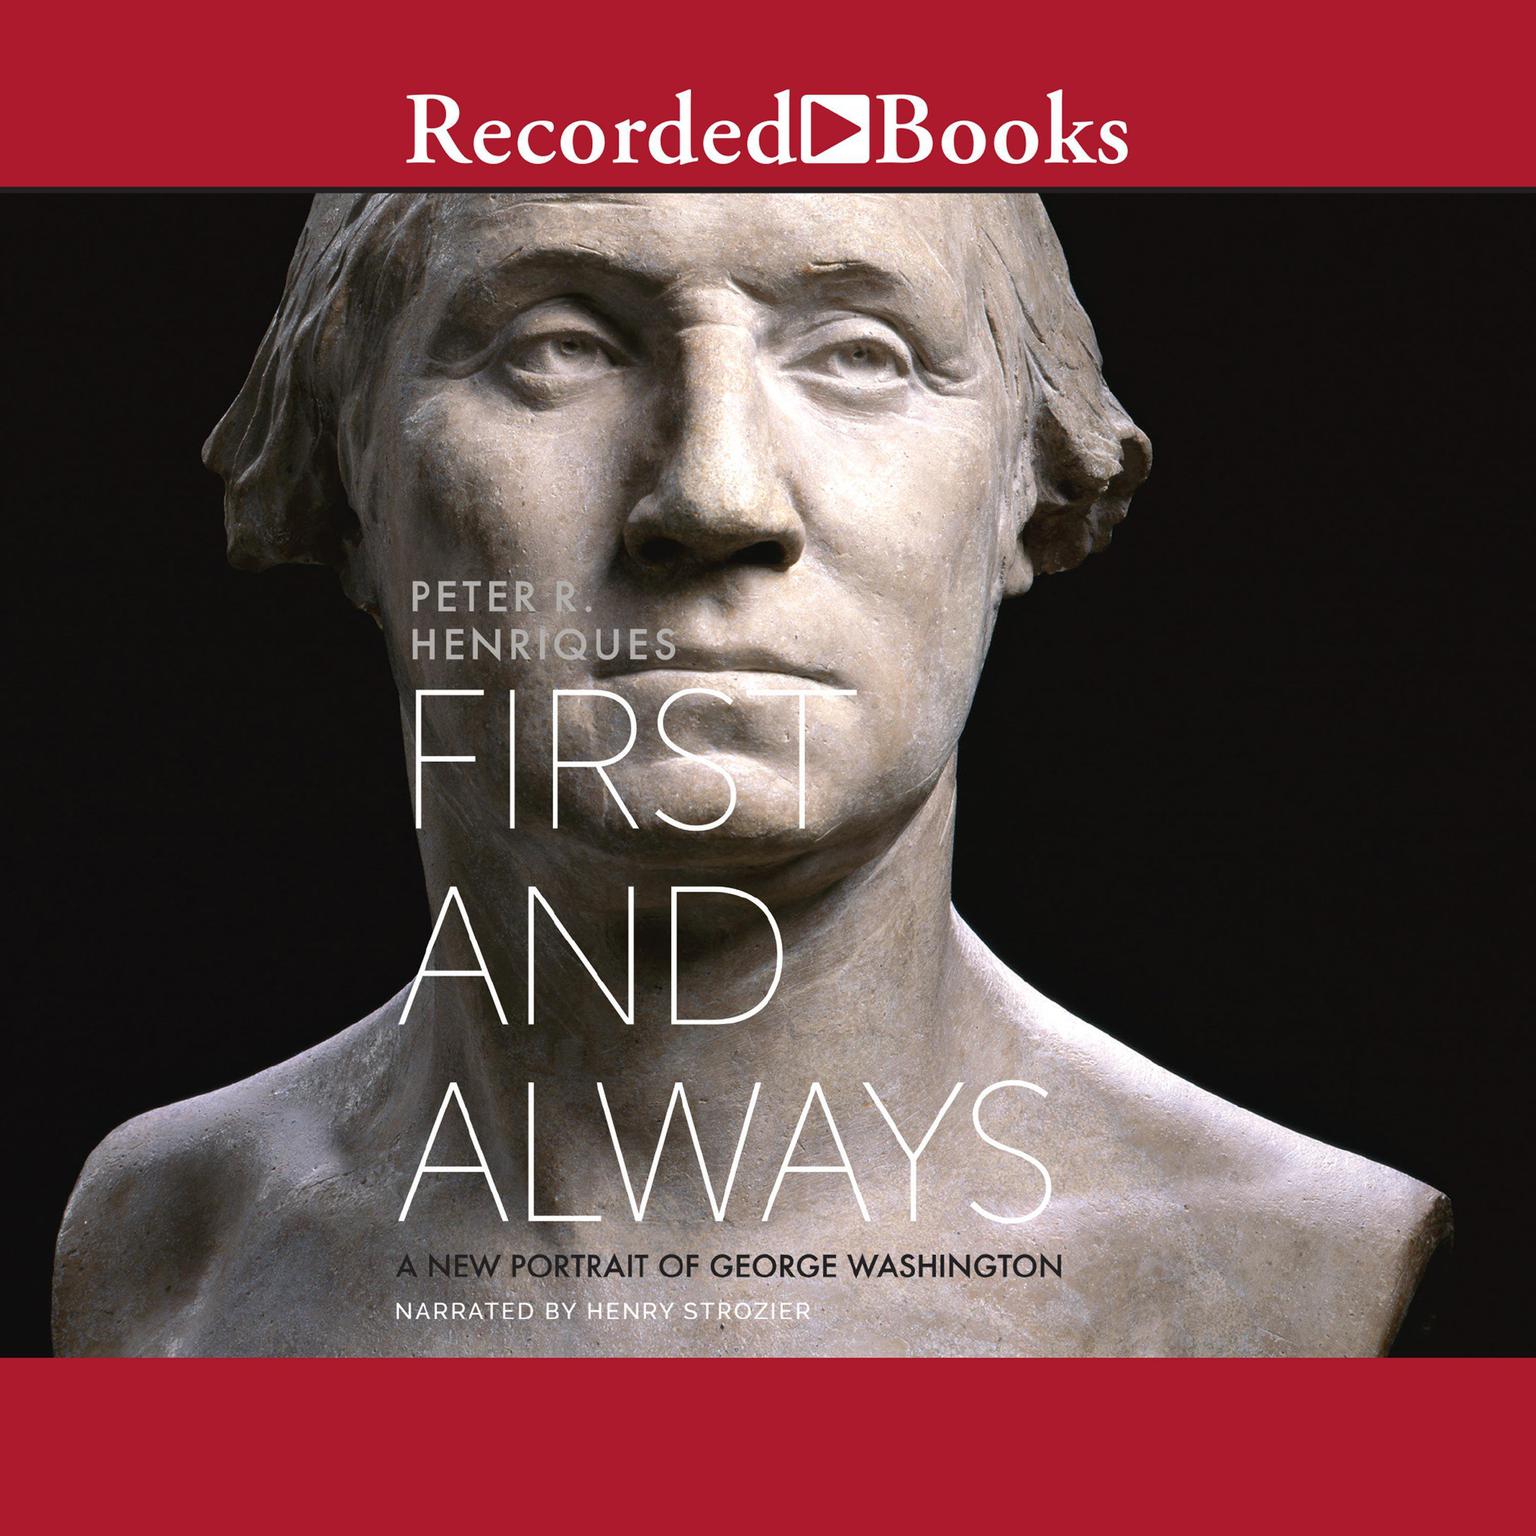 First and Always: A New Portrait of George Washington Audiobook, by Peter R. Henriques